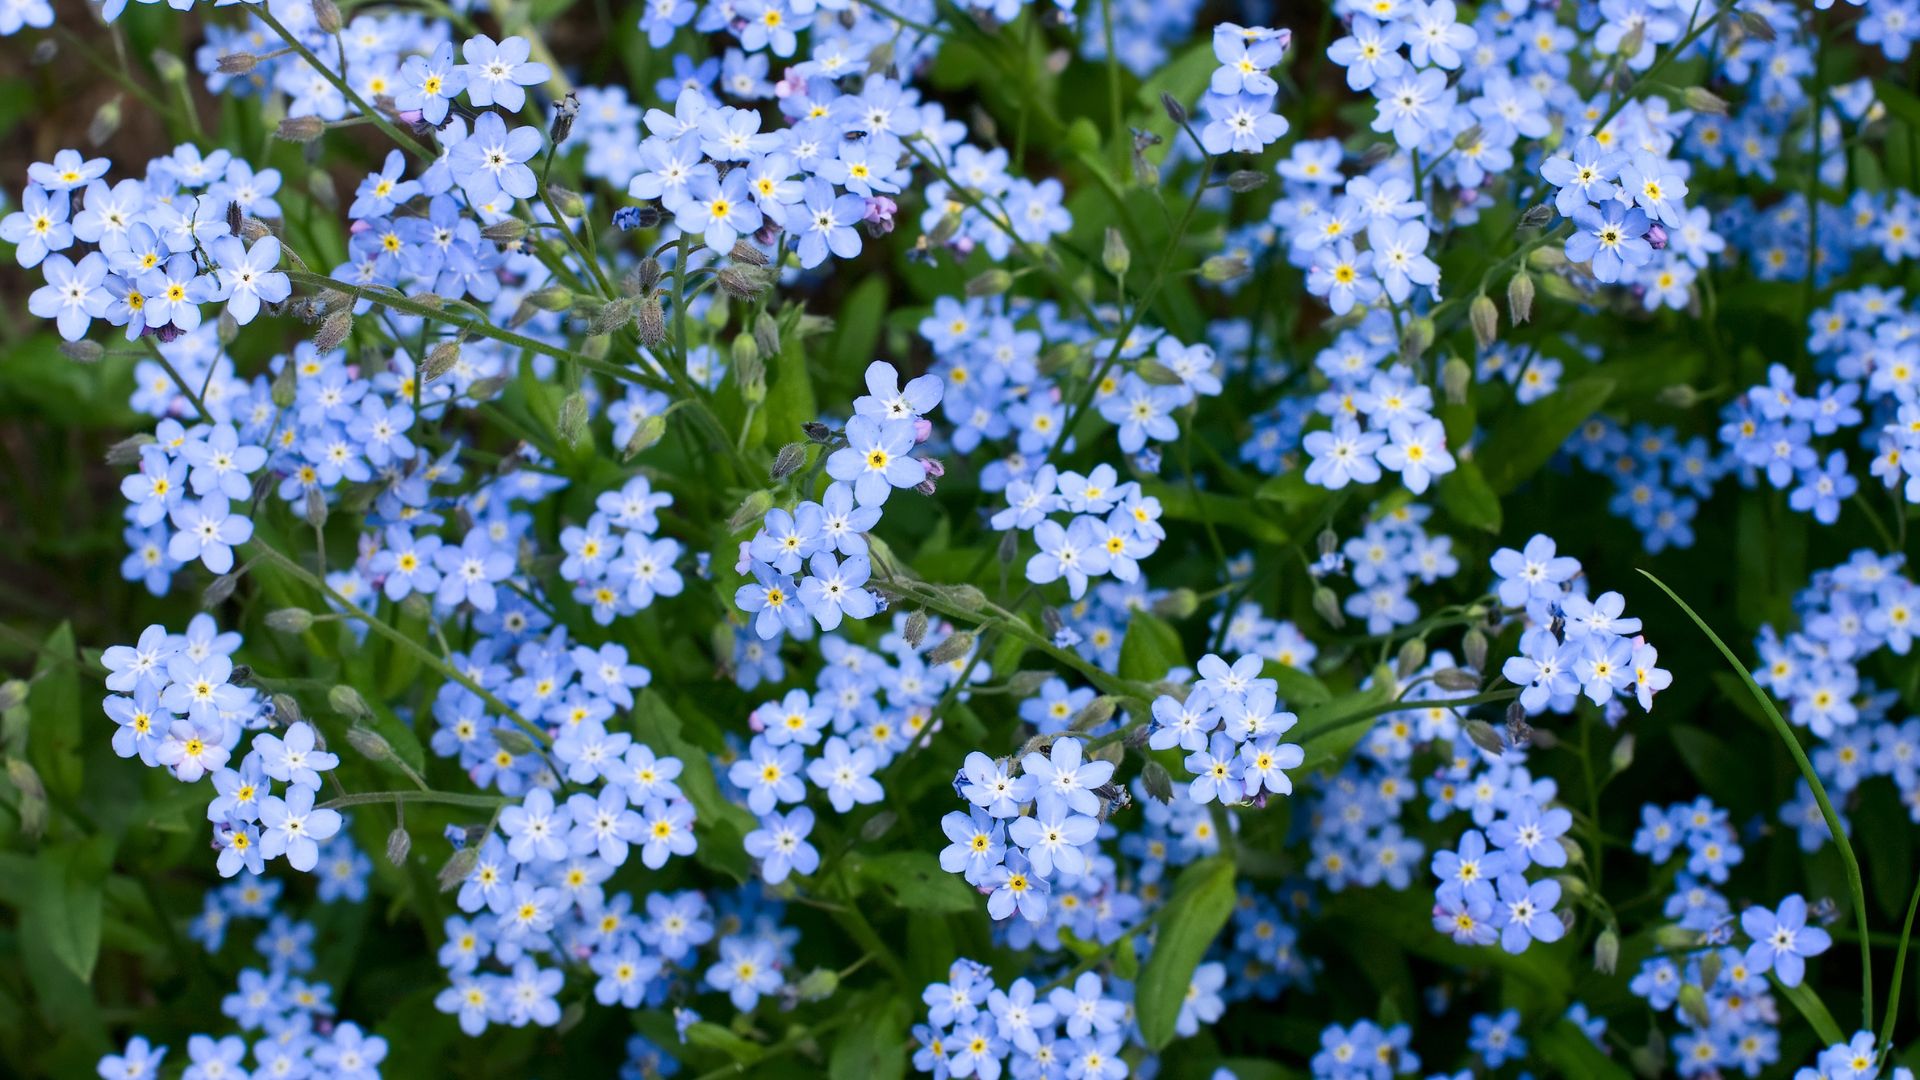 How To Plant And Grow The Lovely Forget-Me-Nots